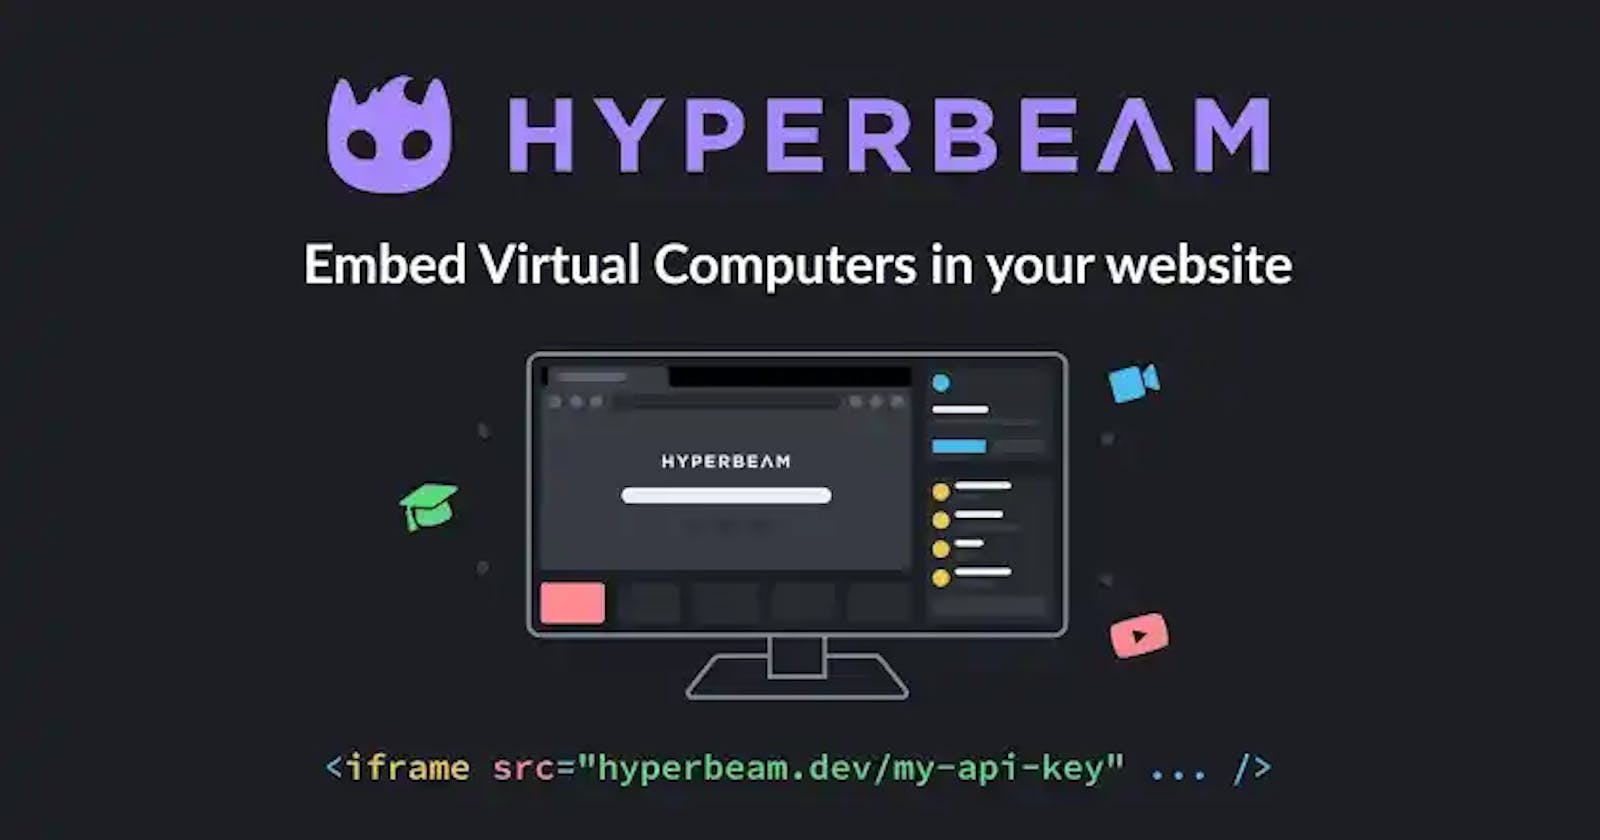 How To Use Hyperbeam